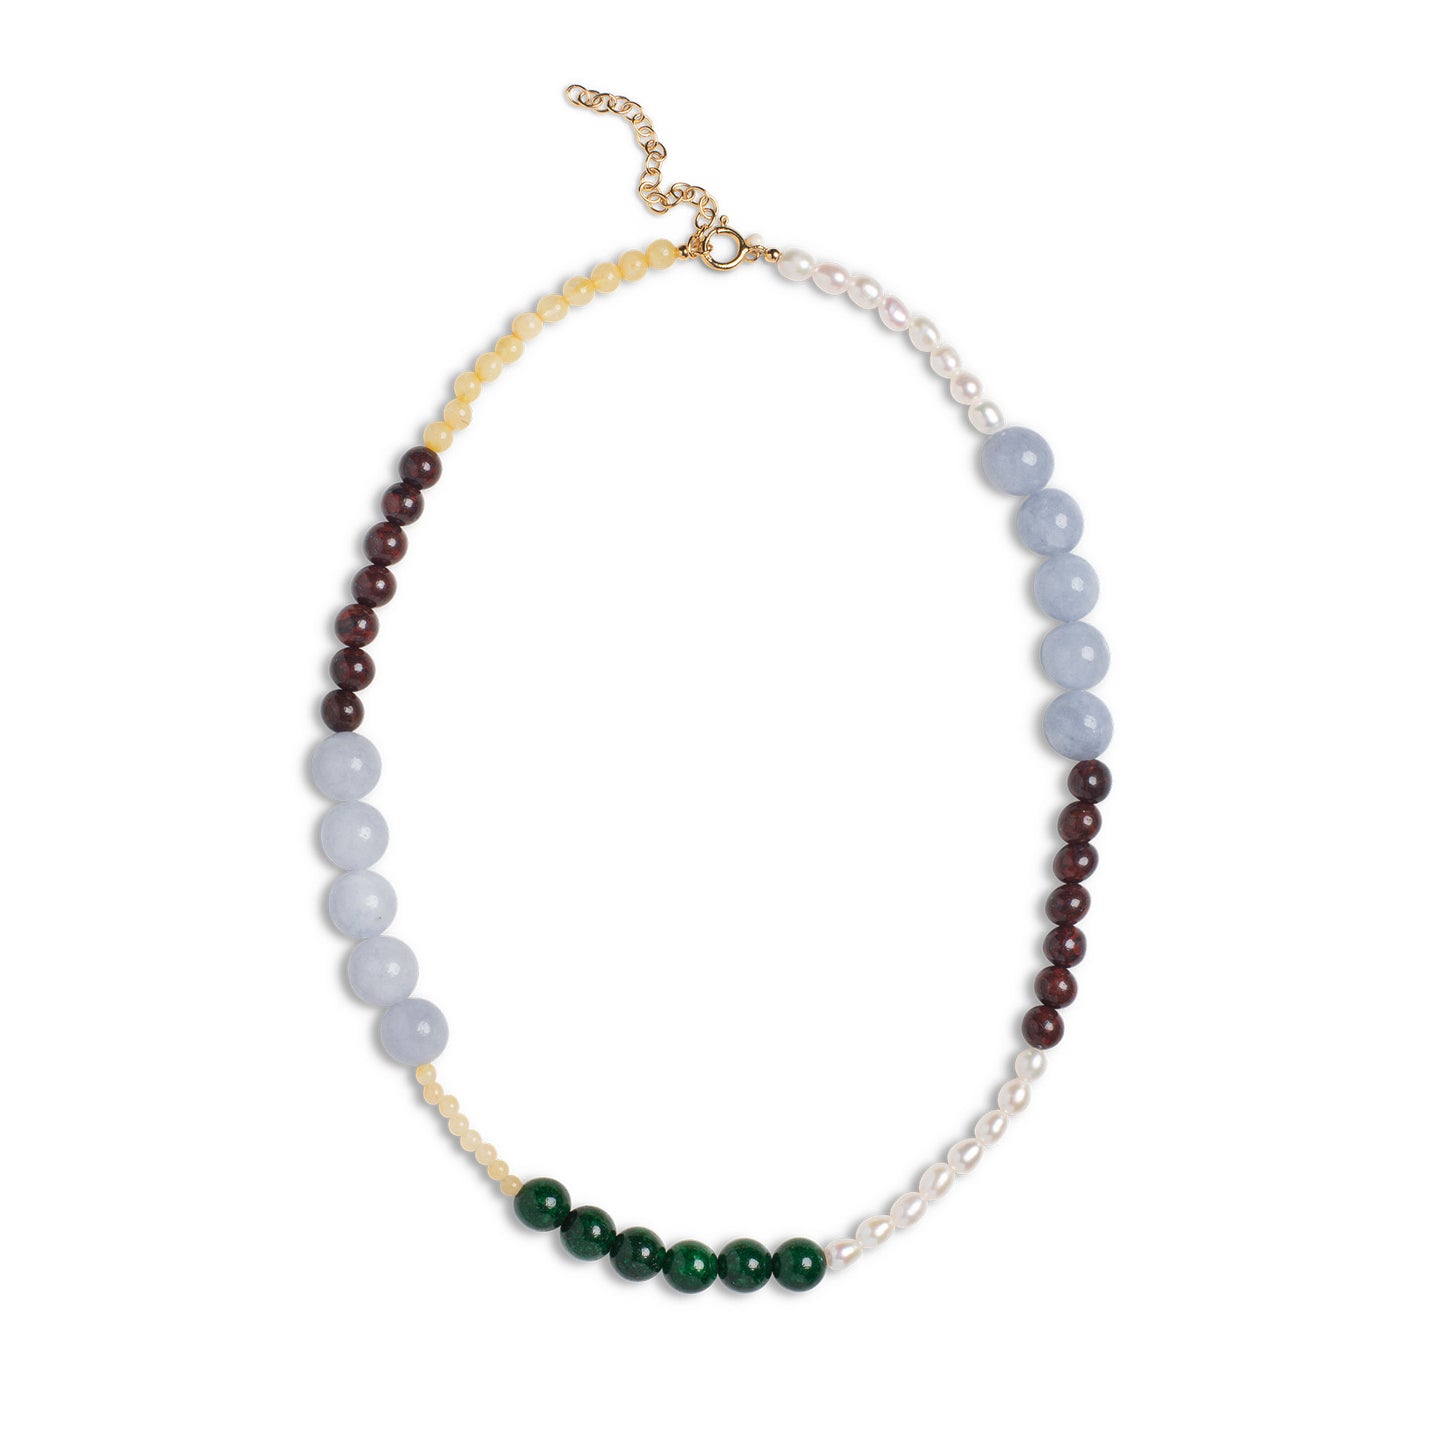 ENAMEL Copenhagen Necklace, Marli Necklaces L. Yellow, Pearl, L. Blue, Brown and D. Green